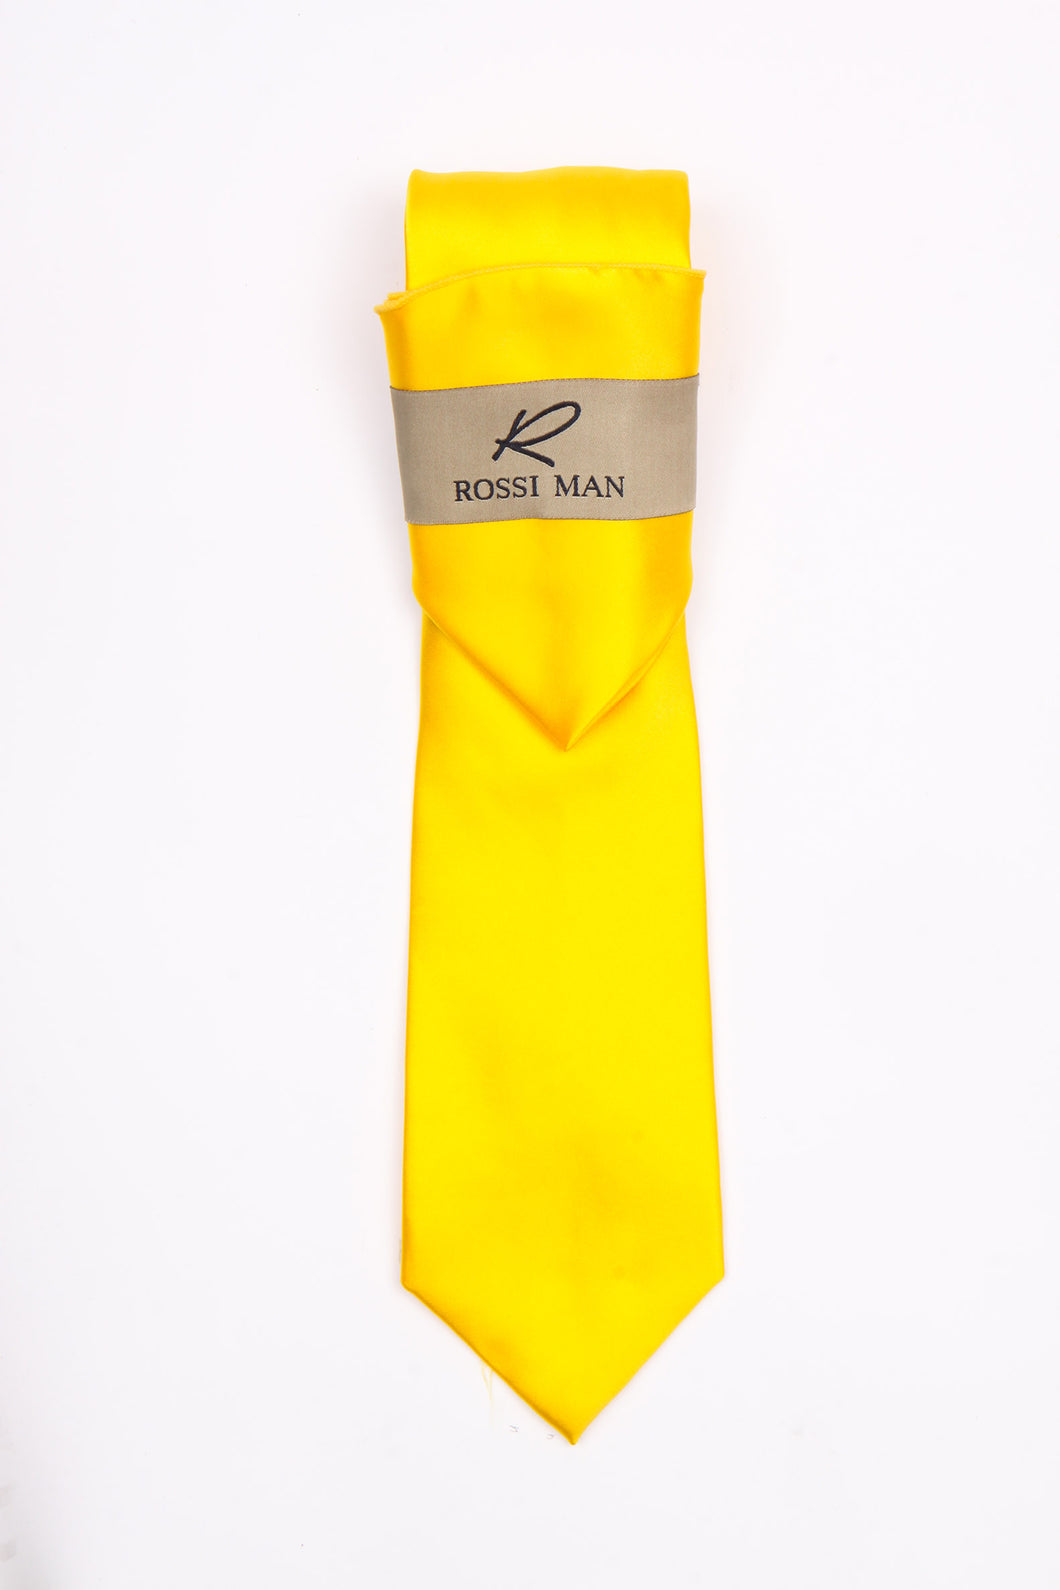 Rossi Man Tie and Pocket Round - RMR665-1